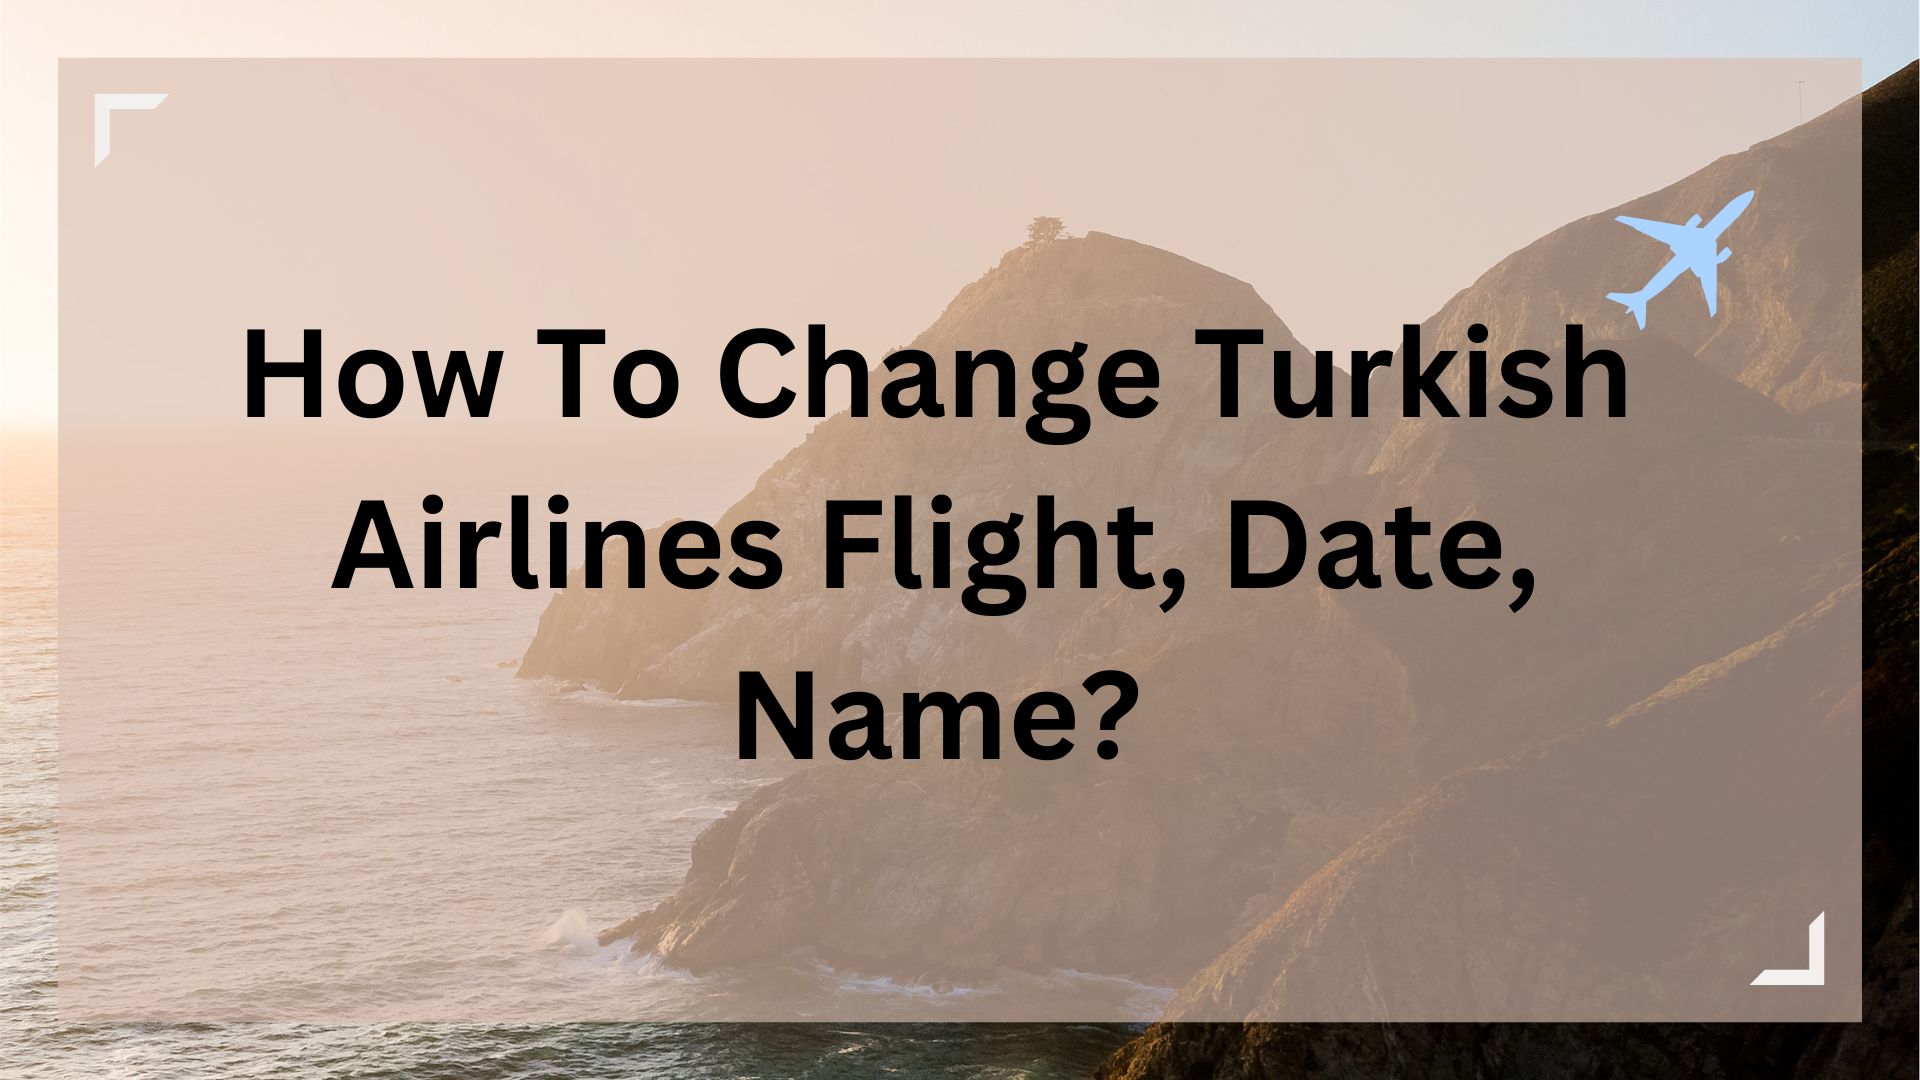 How To Change Turkish Airlines Flight, Date, Name64268ac570387.jpg